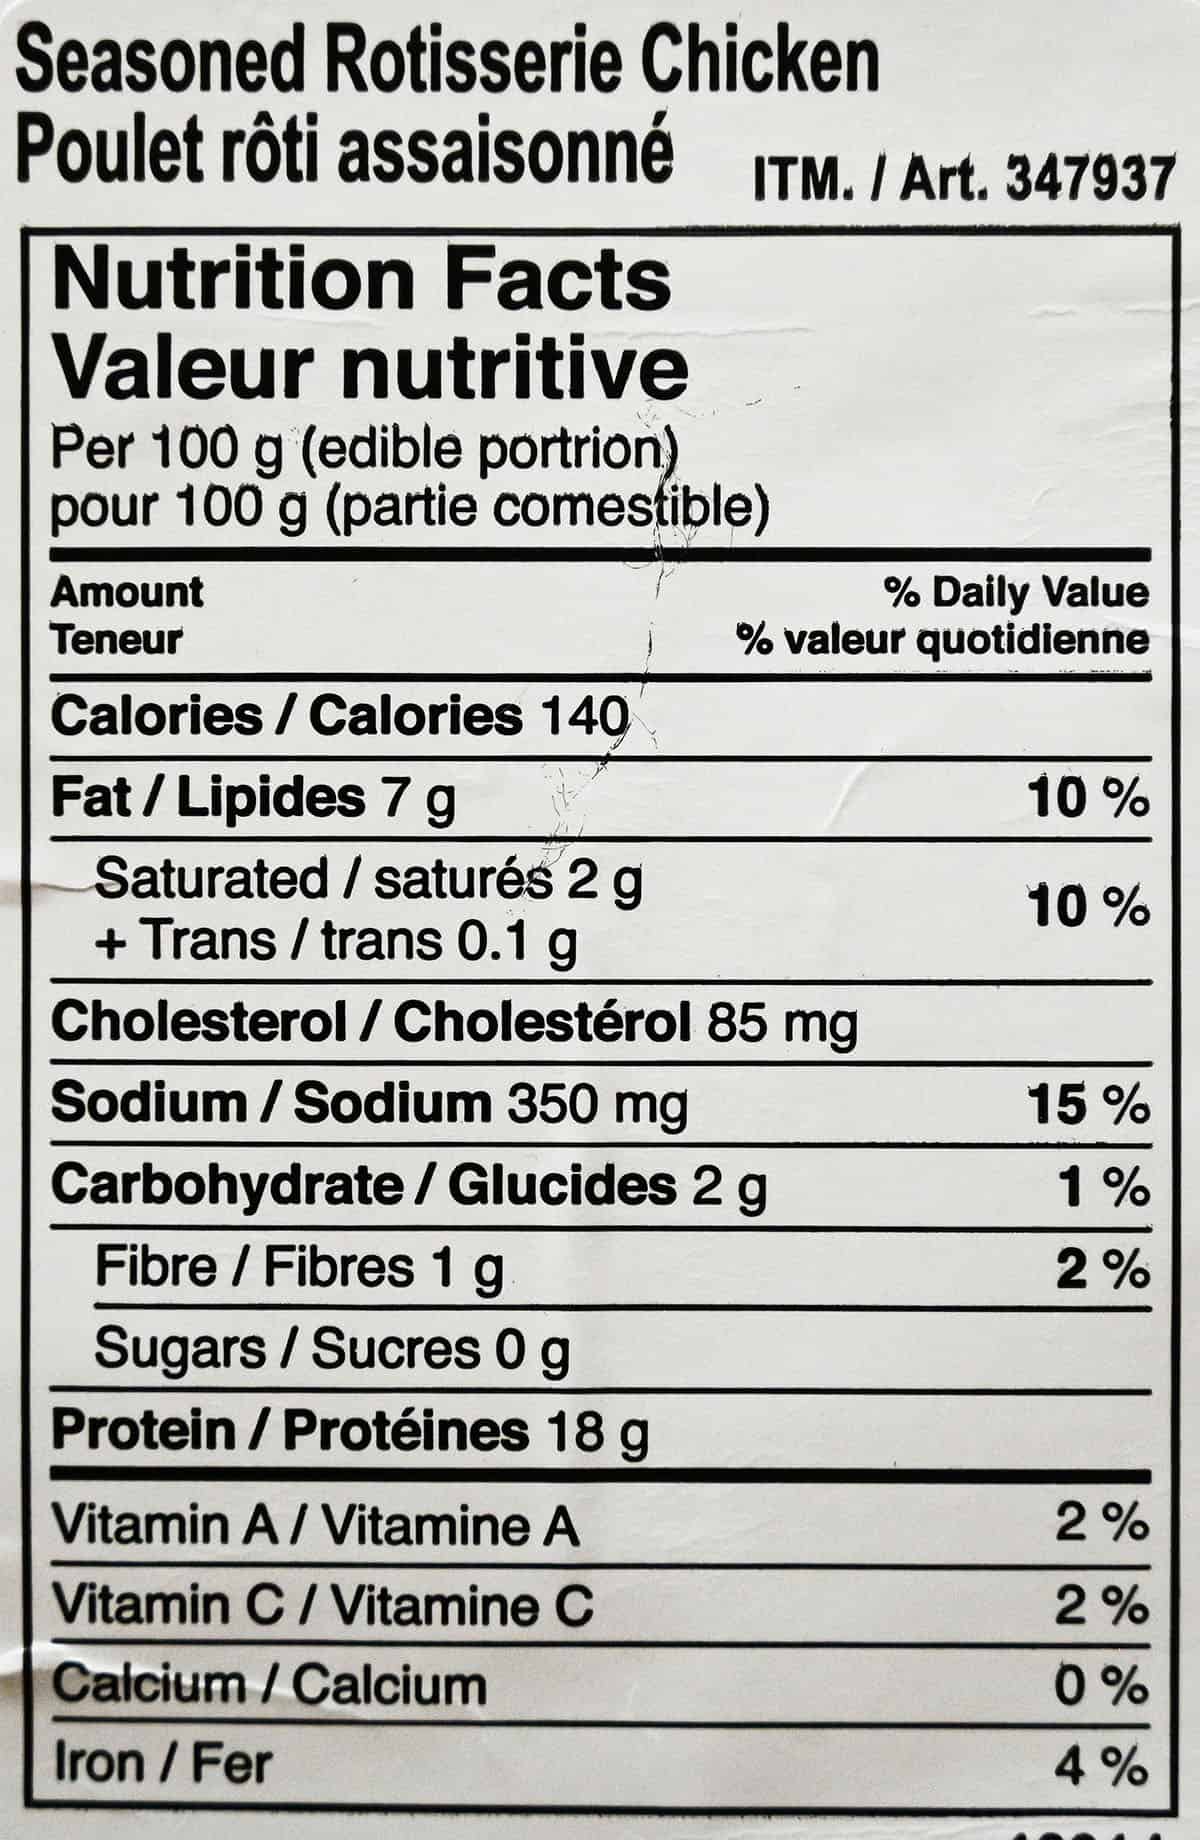 Costco rotisserie chicken nutrition facts from the label on the container.